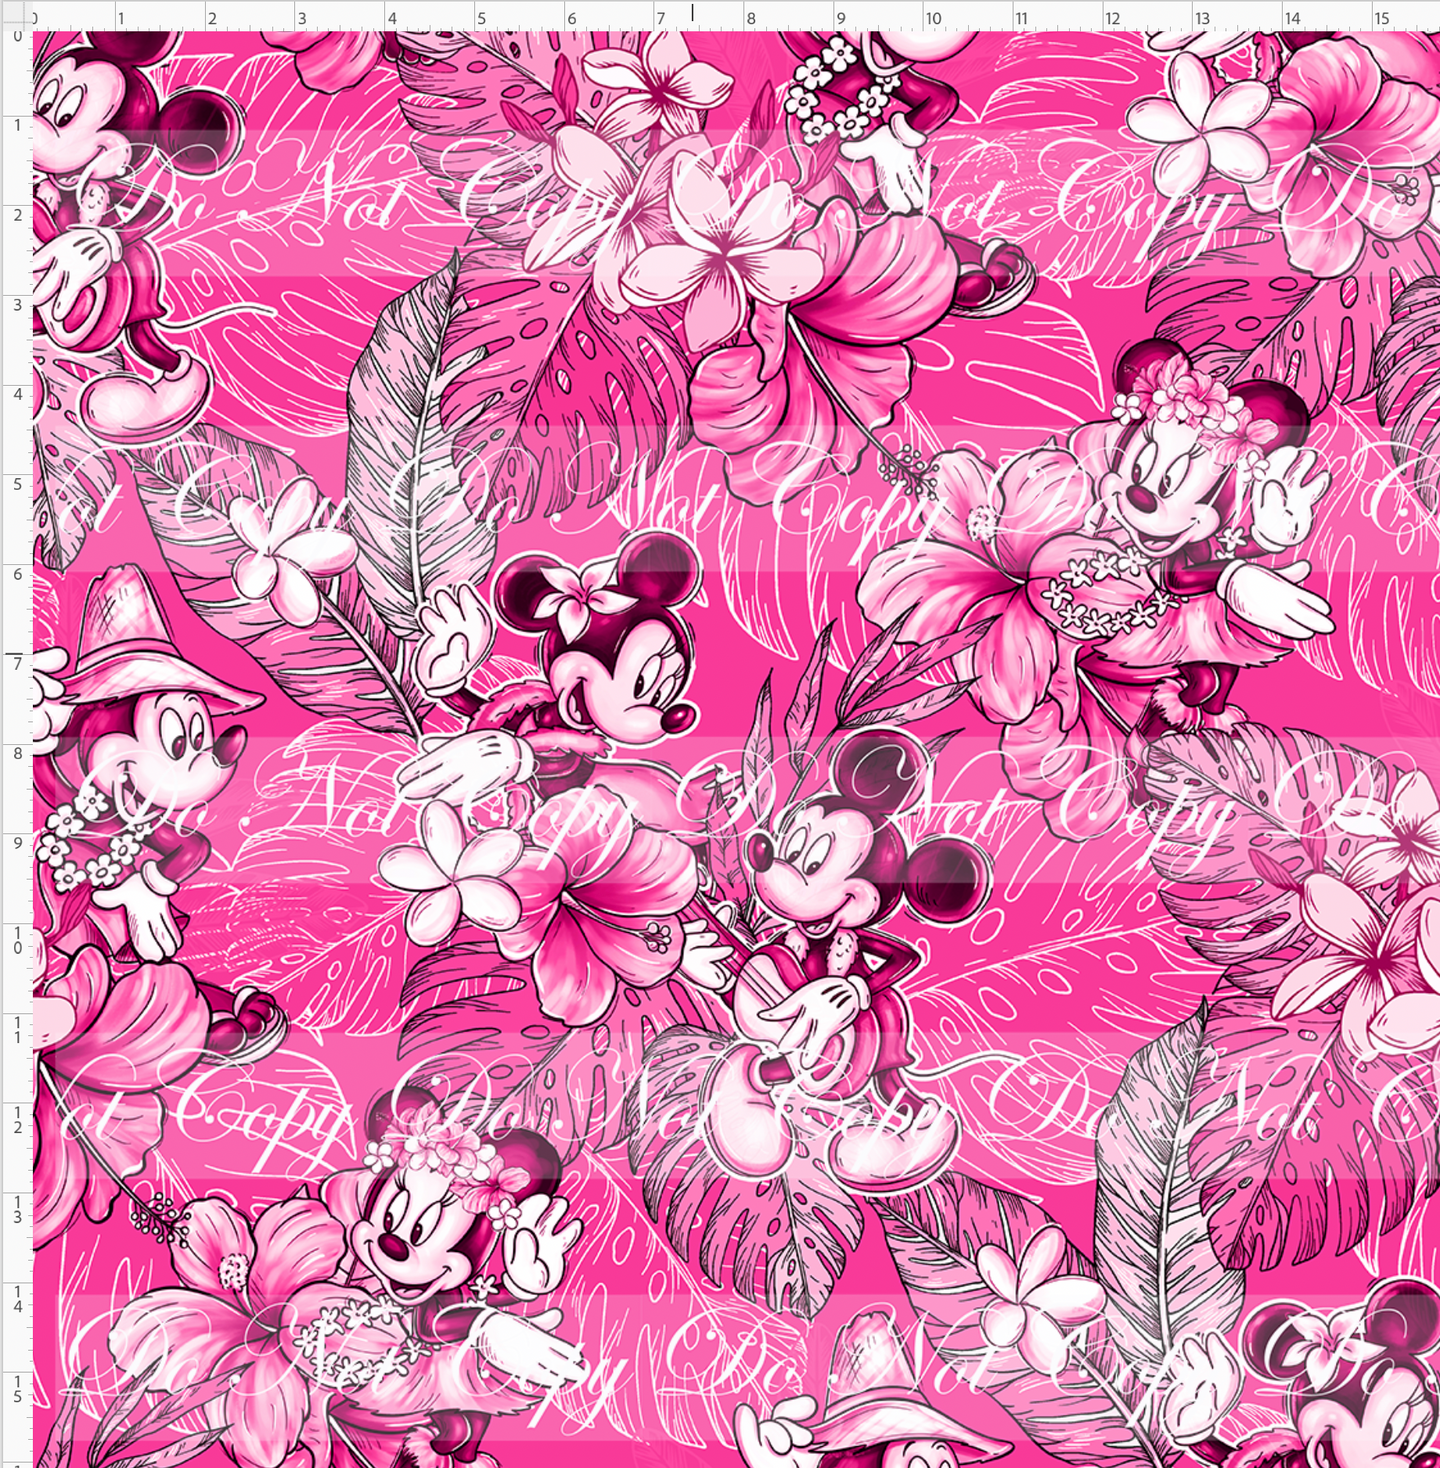 Retail - Aulani - Floral Monotone Characters - Pink - LARGE SCALE